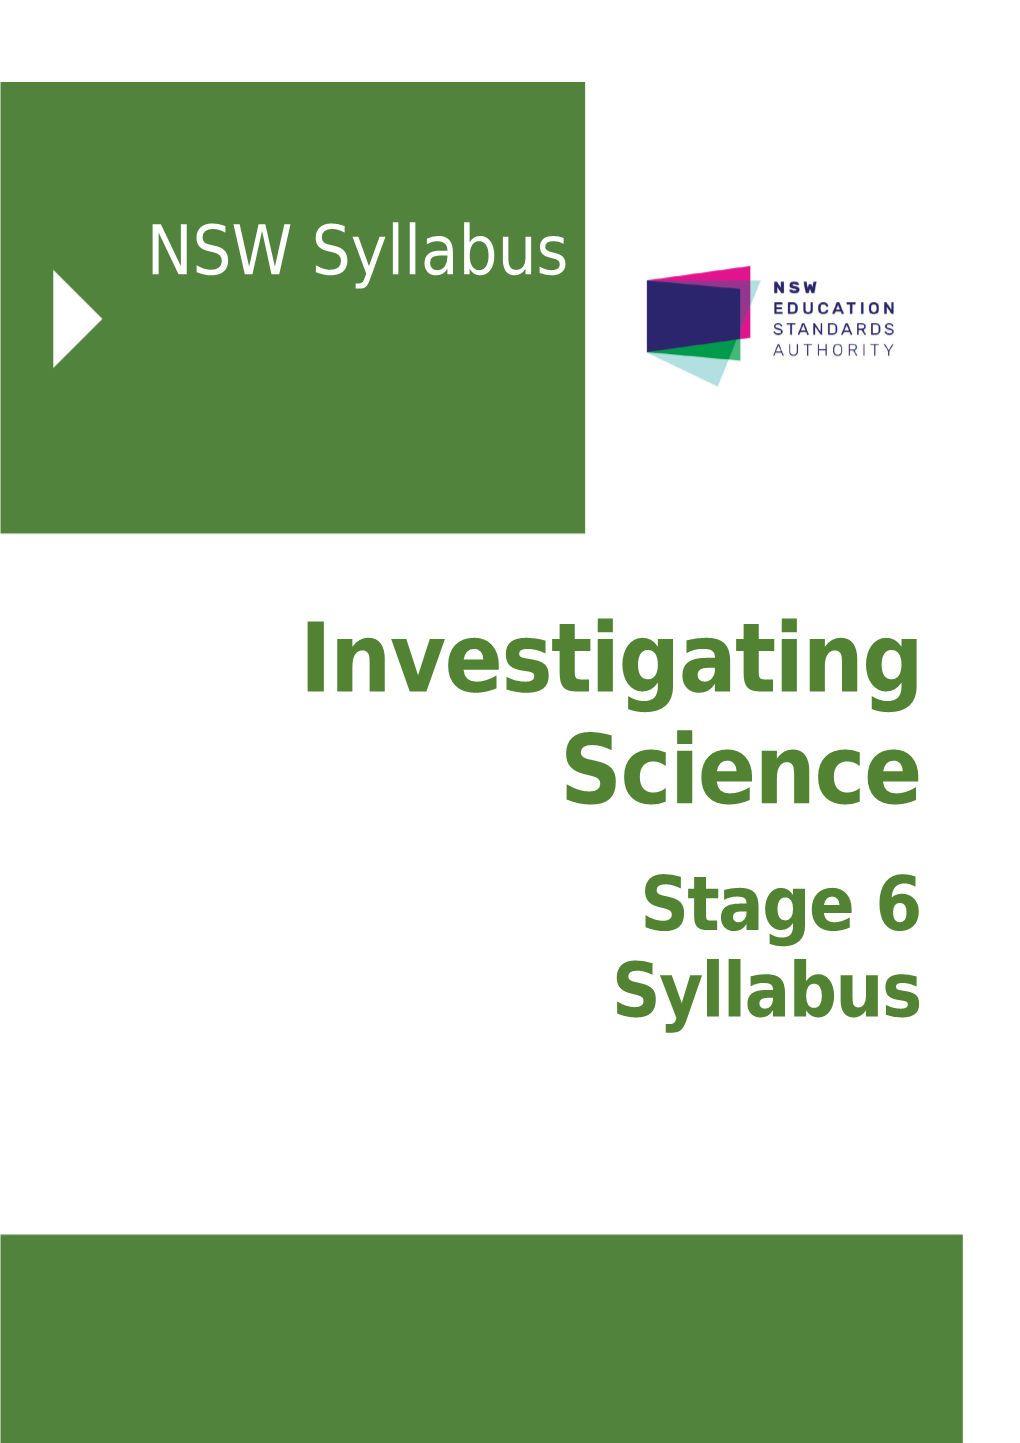 Investigating Science Stage 6 Syllabus 2017